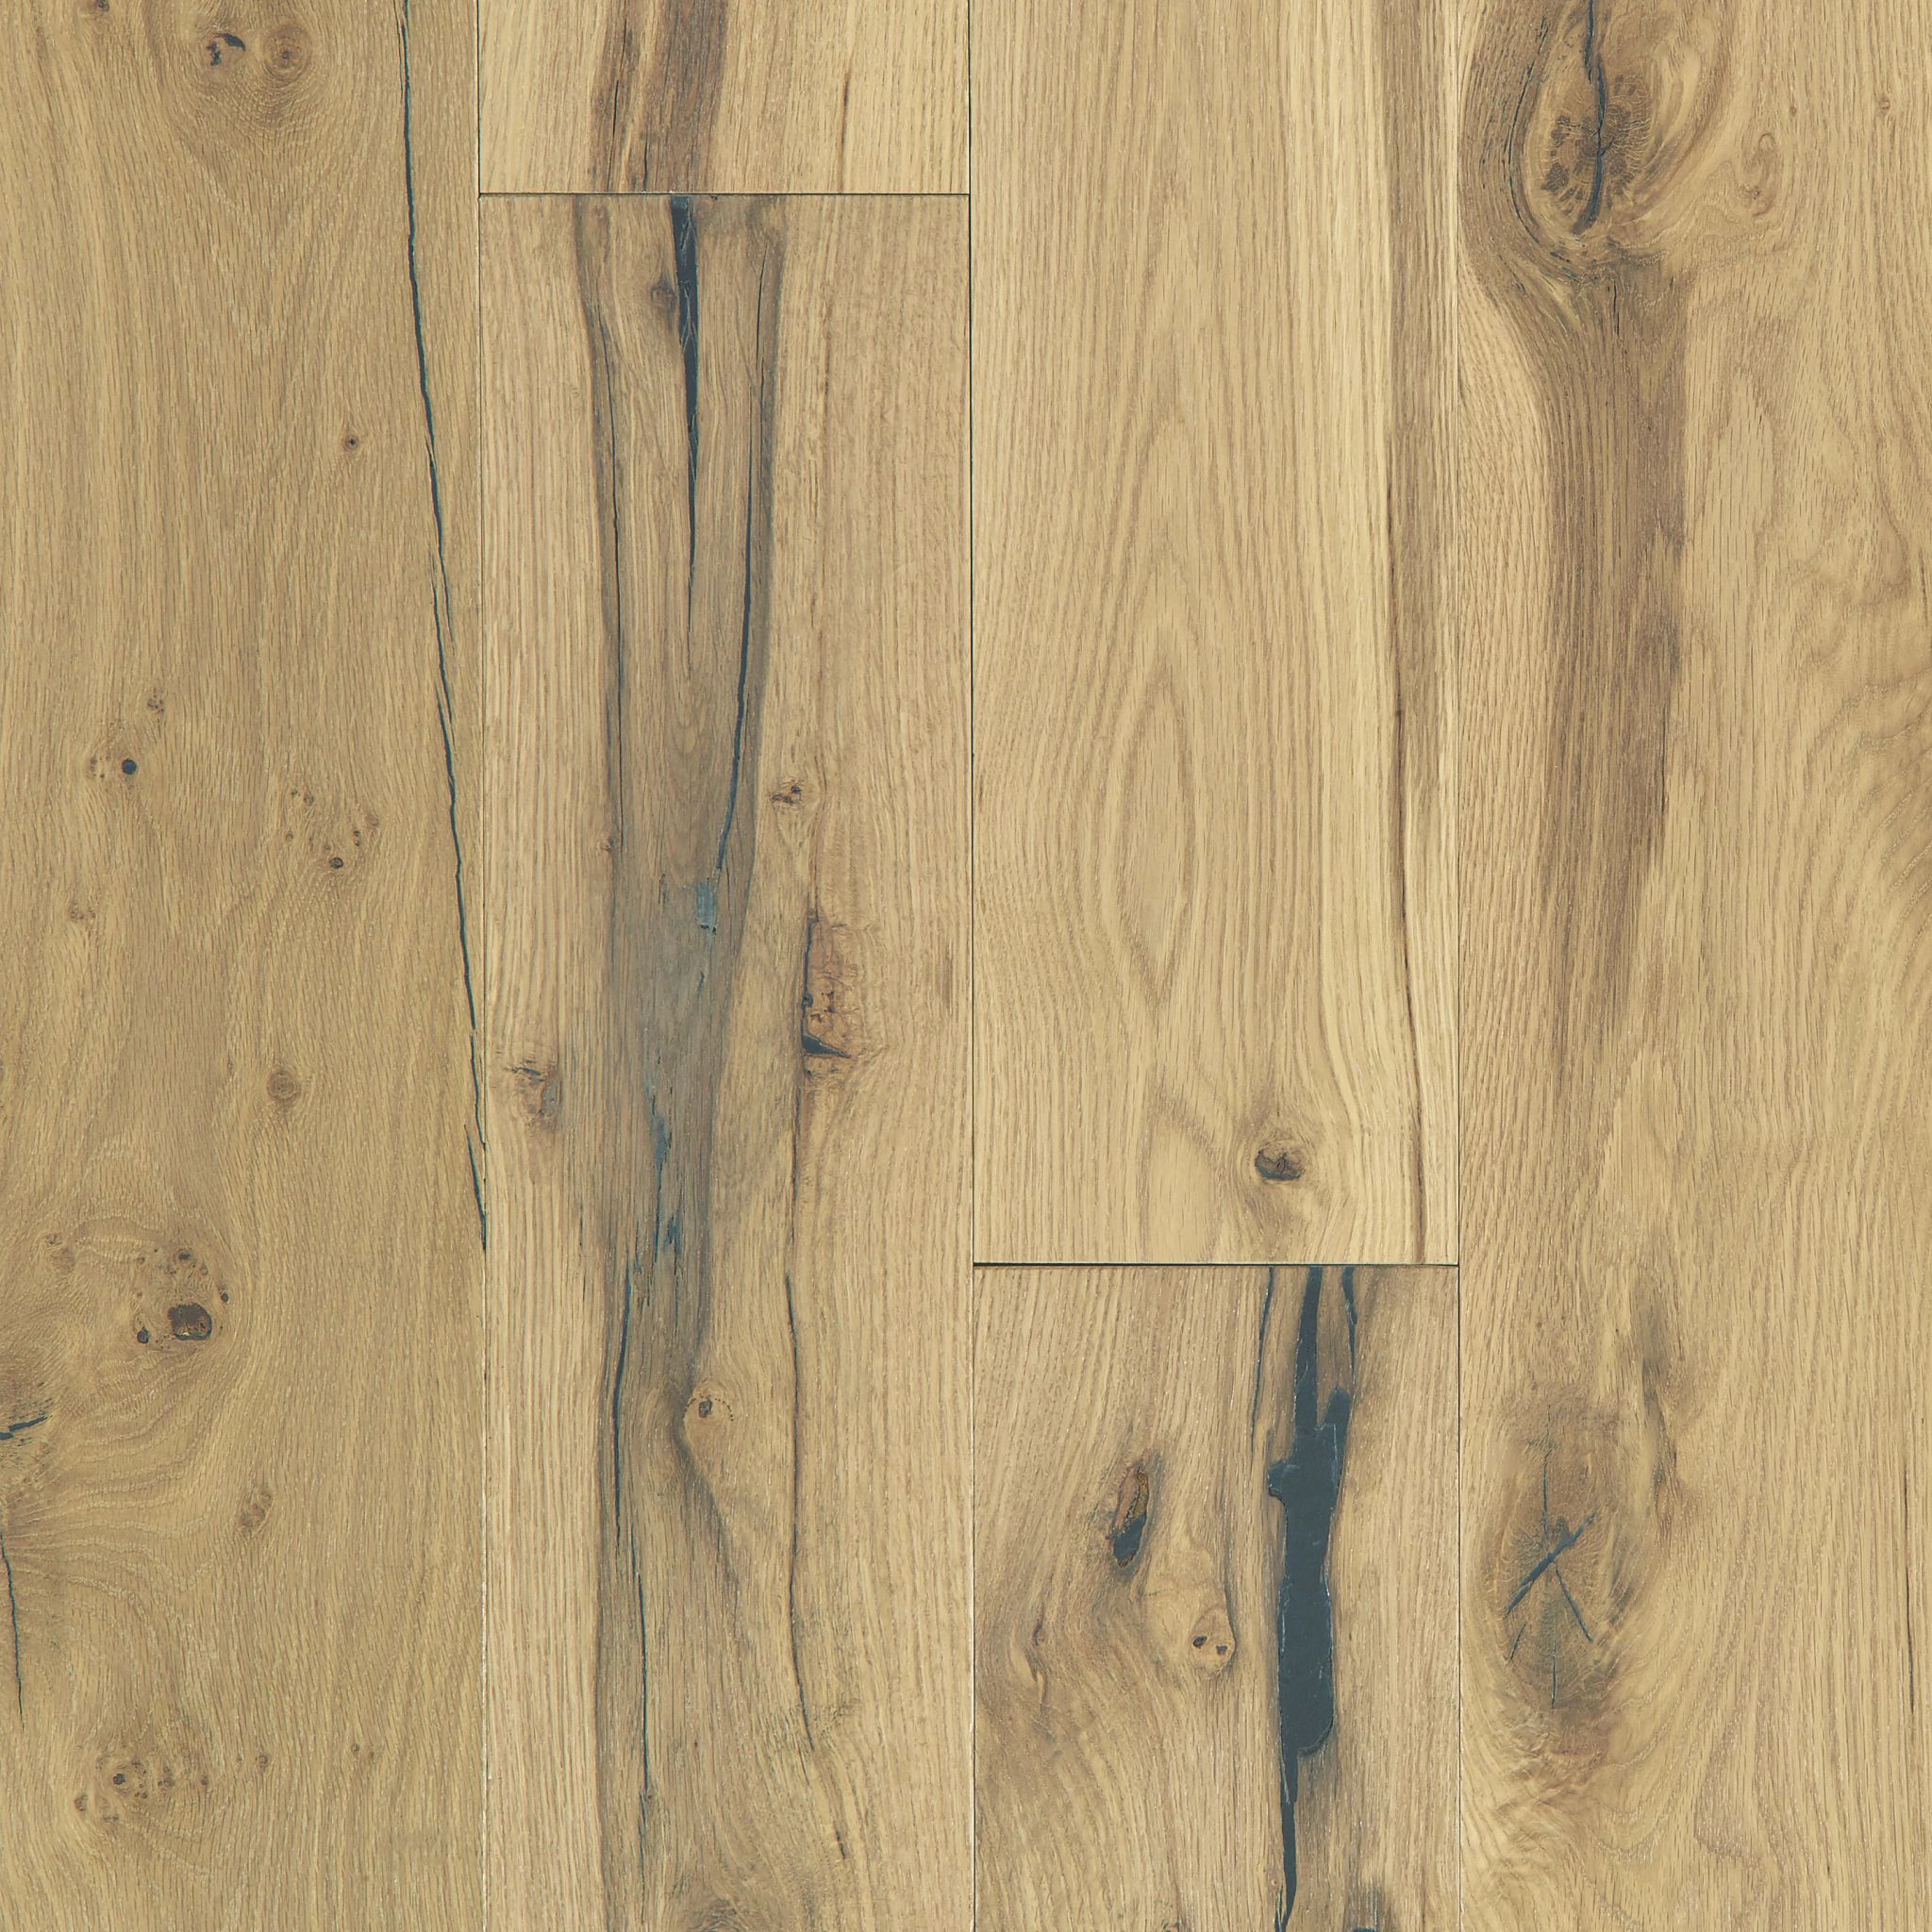 Style name and number: Reflections White Oak SW661 and color name and number: Timber 01027